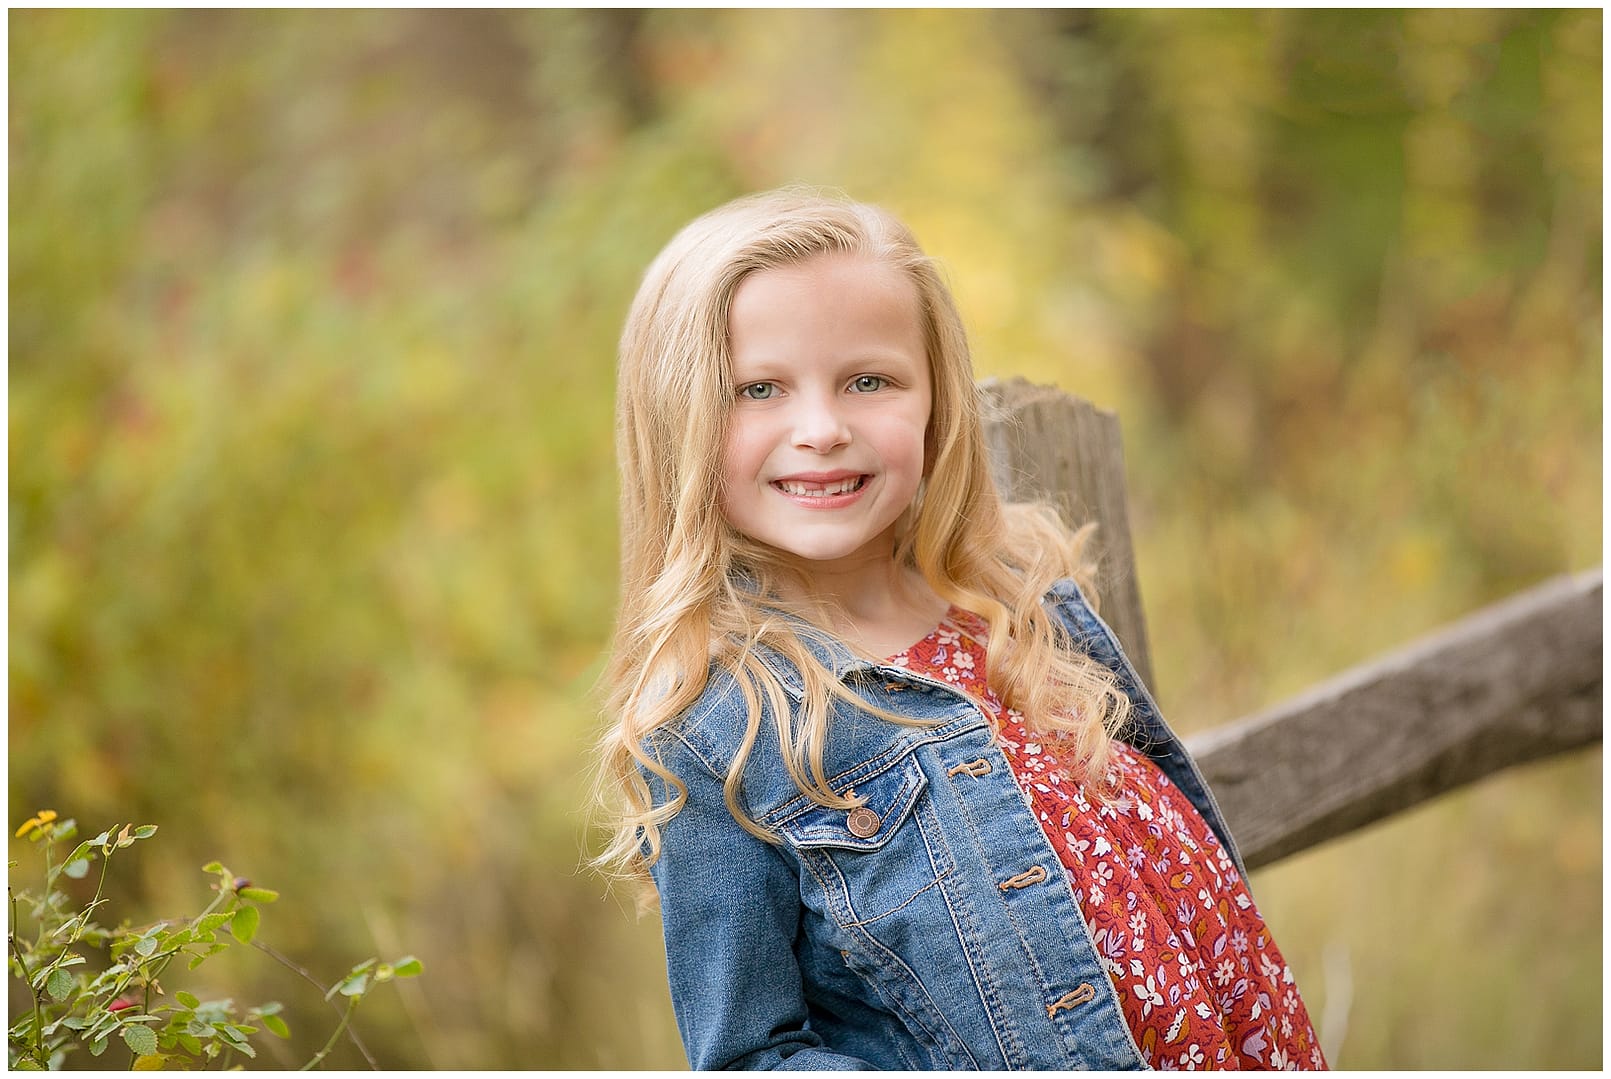 Child poses for portrait. Photo by Tiffany Hix Photography.